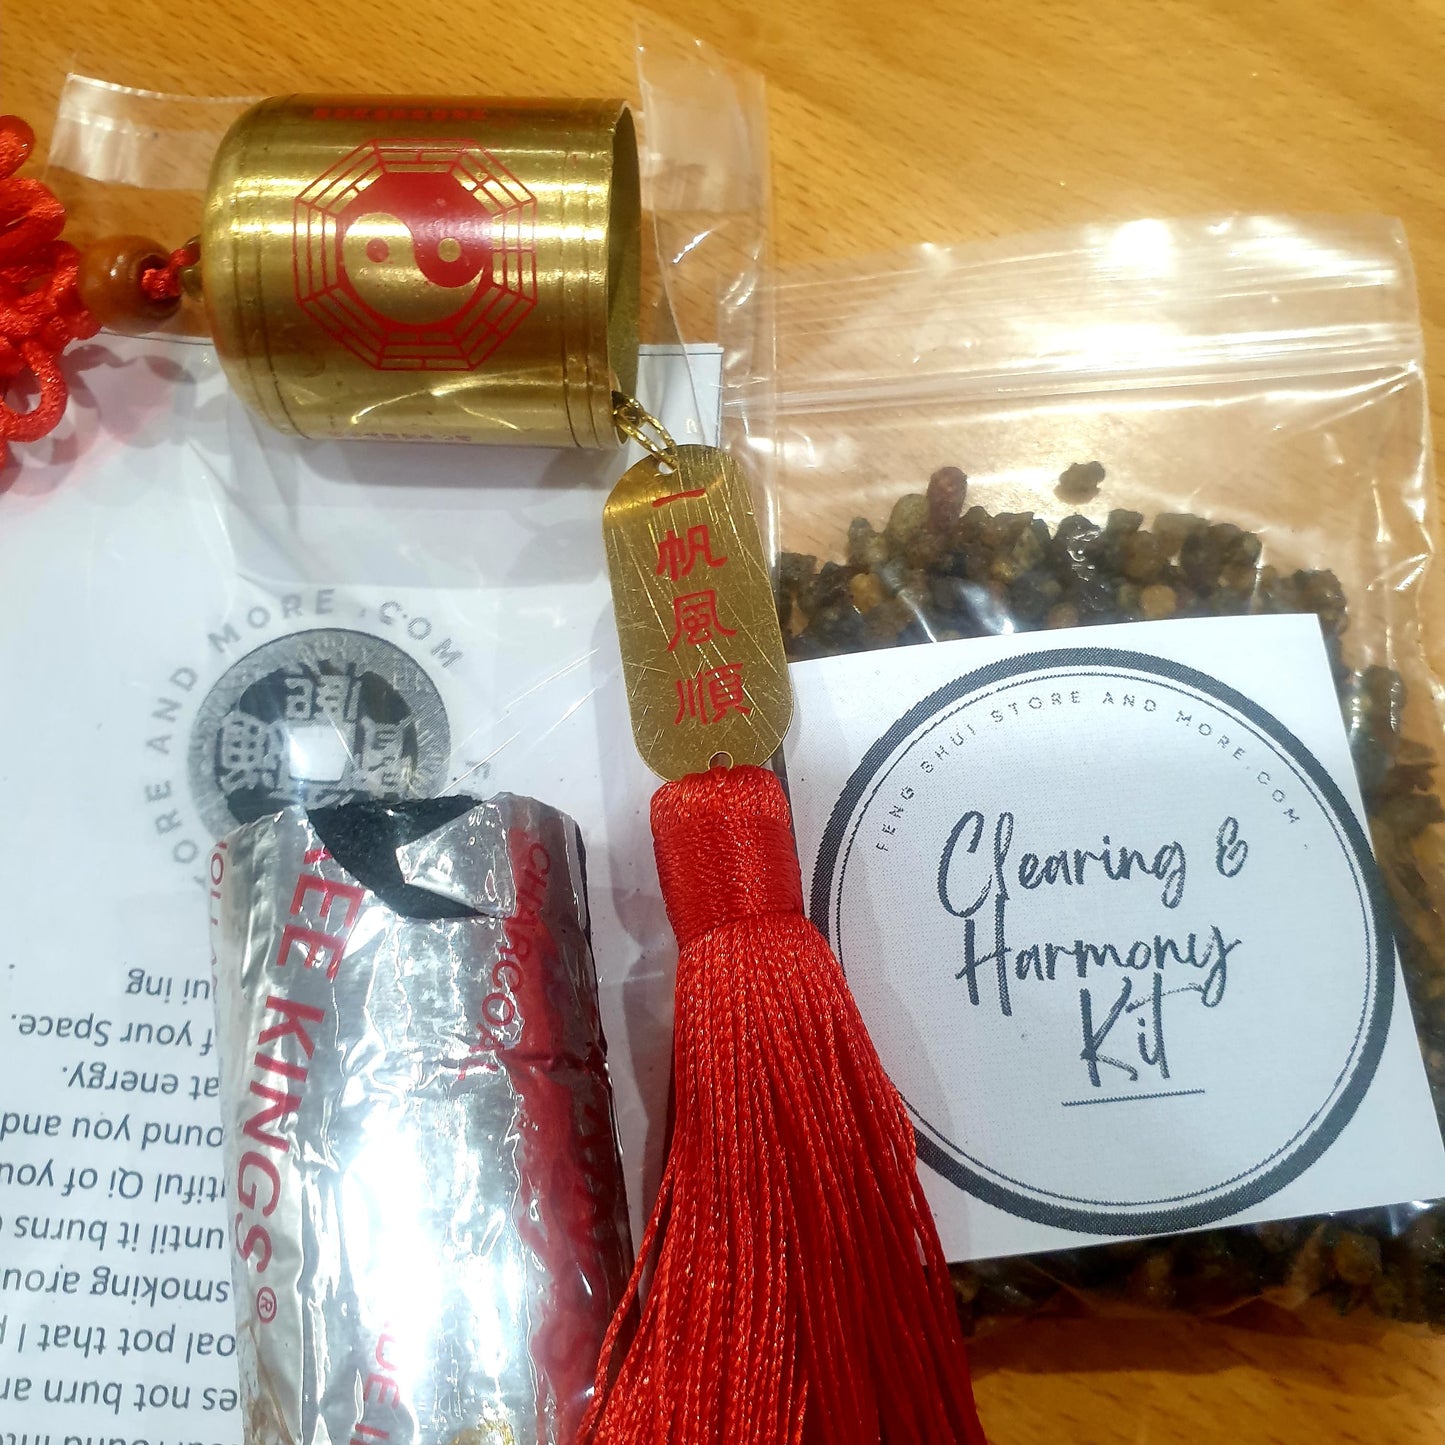 Home Energy Clearing and Harmony Kits